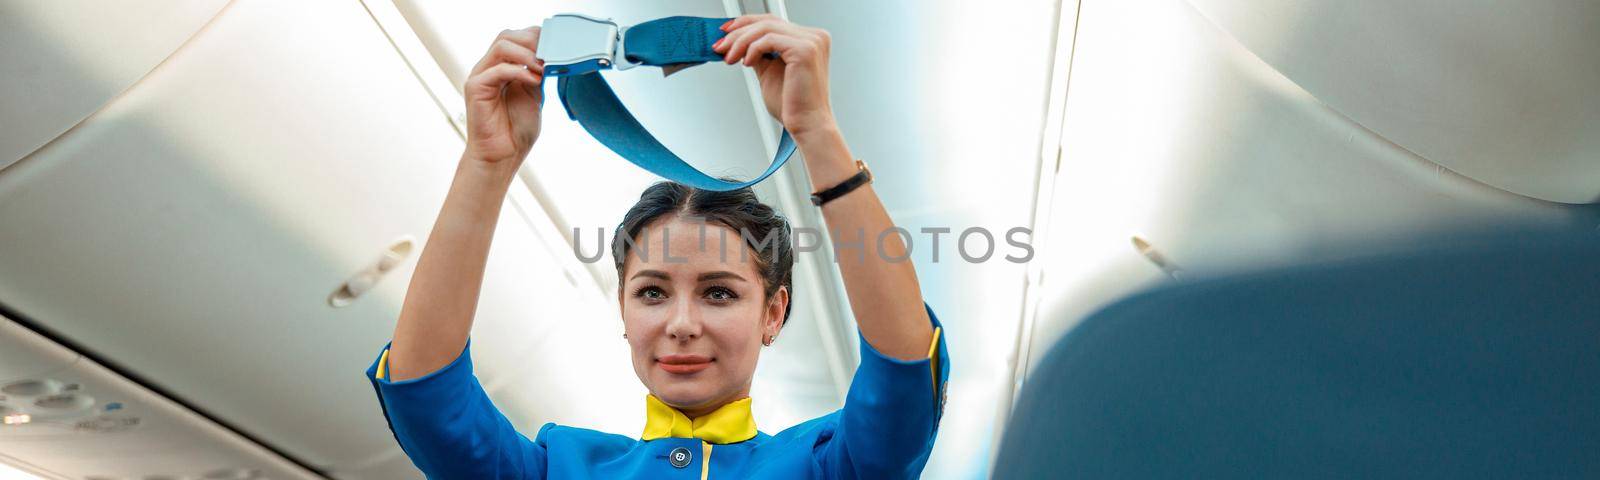 Woman stewardess demonstrating how to use safety belt in aircraft by Yaroslav_astakhov